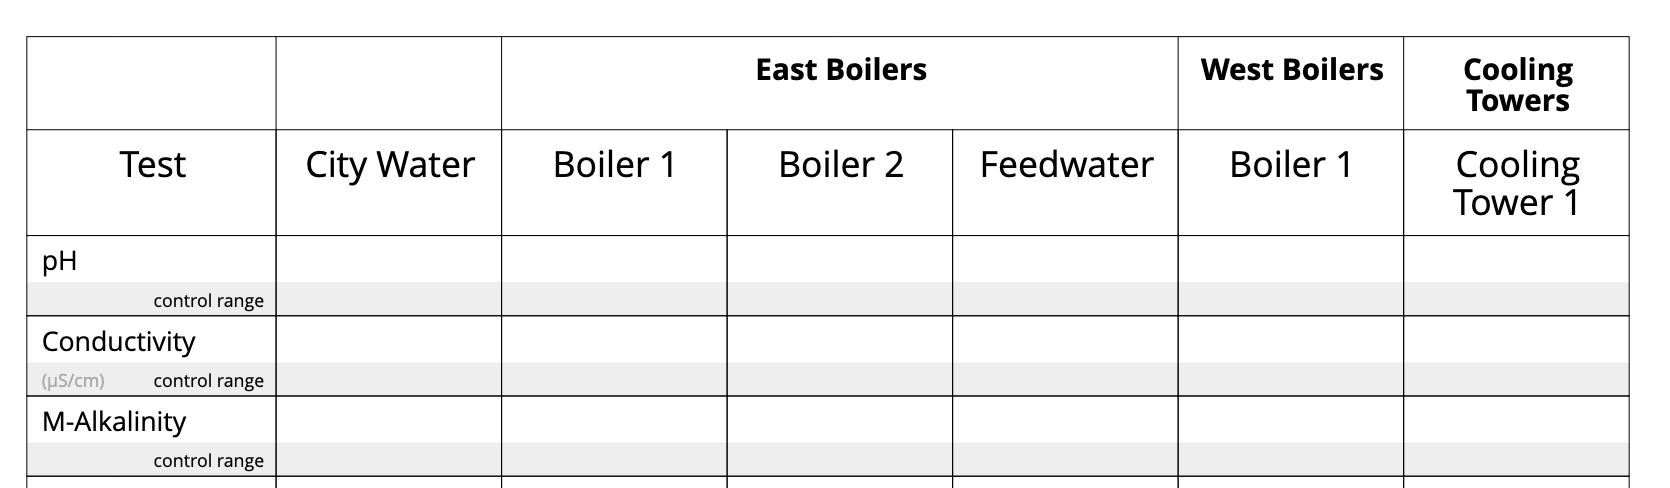 Grouping boiler systems for water treatment reports in Aqualytics